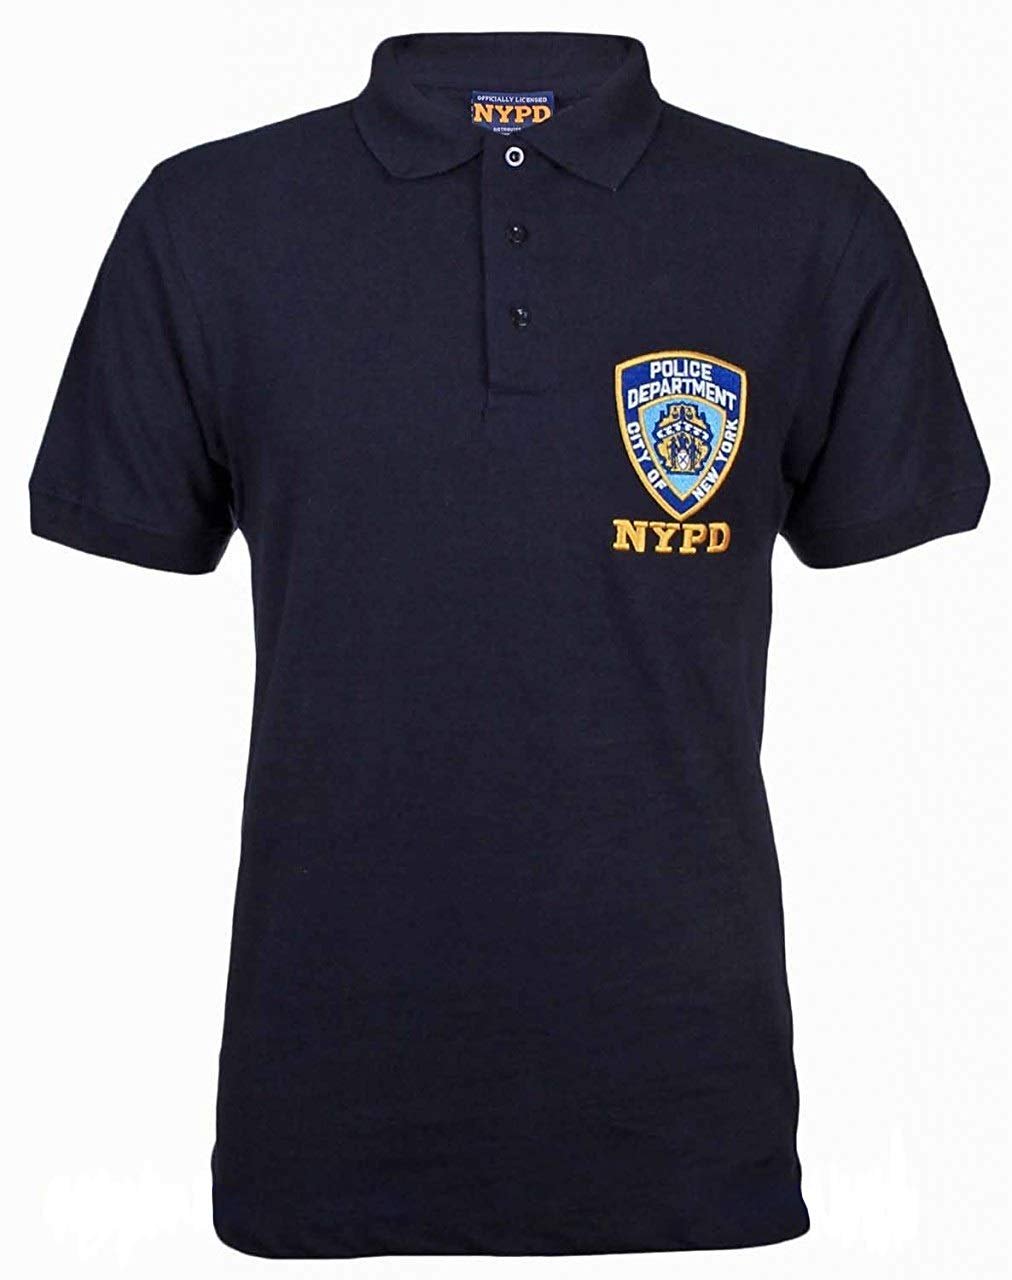 Officially Licensed NYPD T-Shirts, Hoodies, Hats